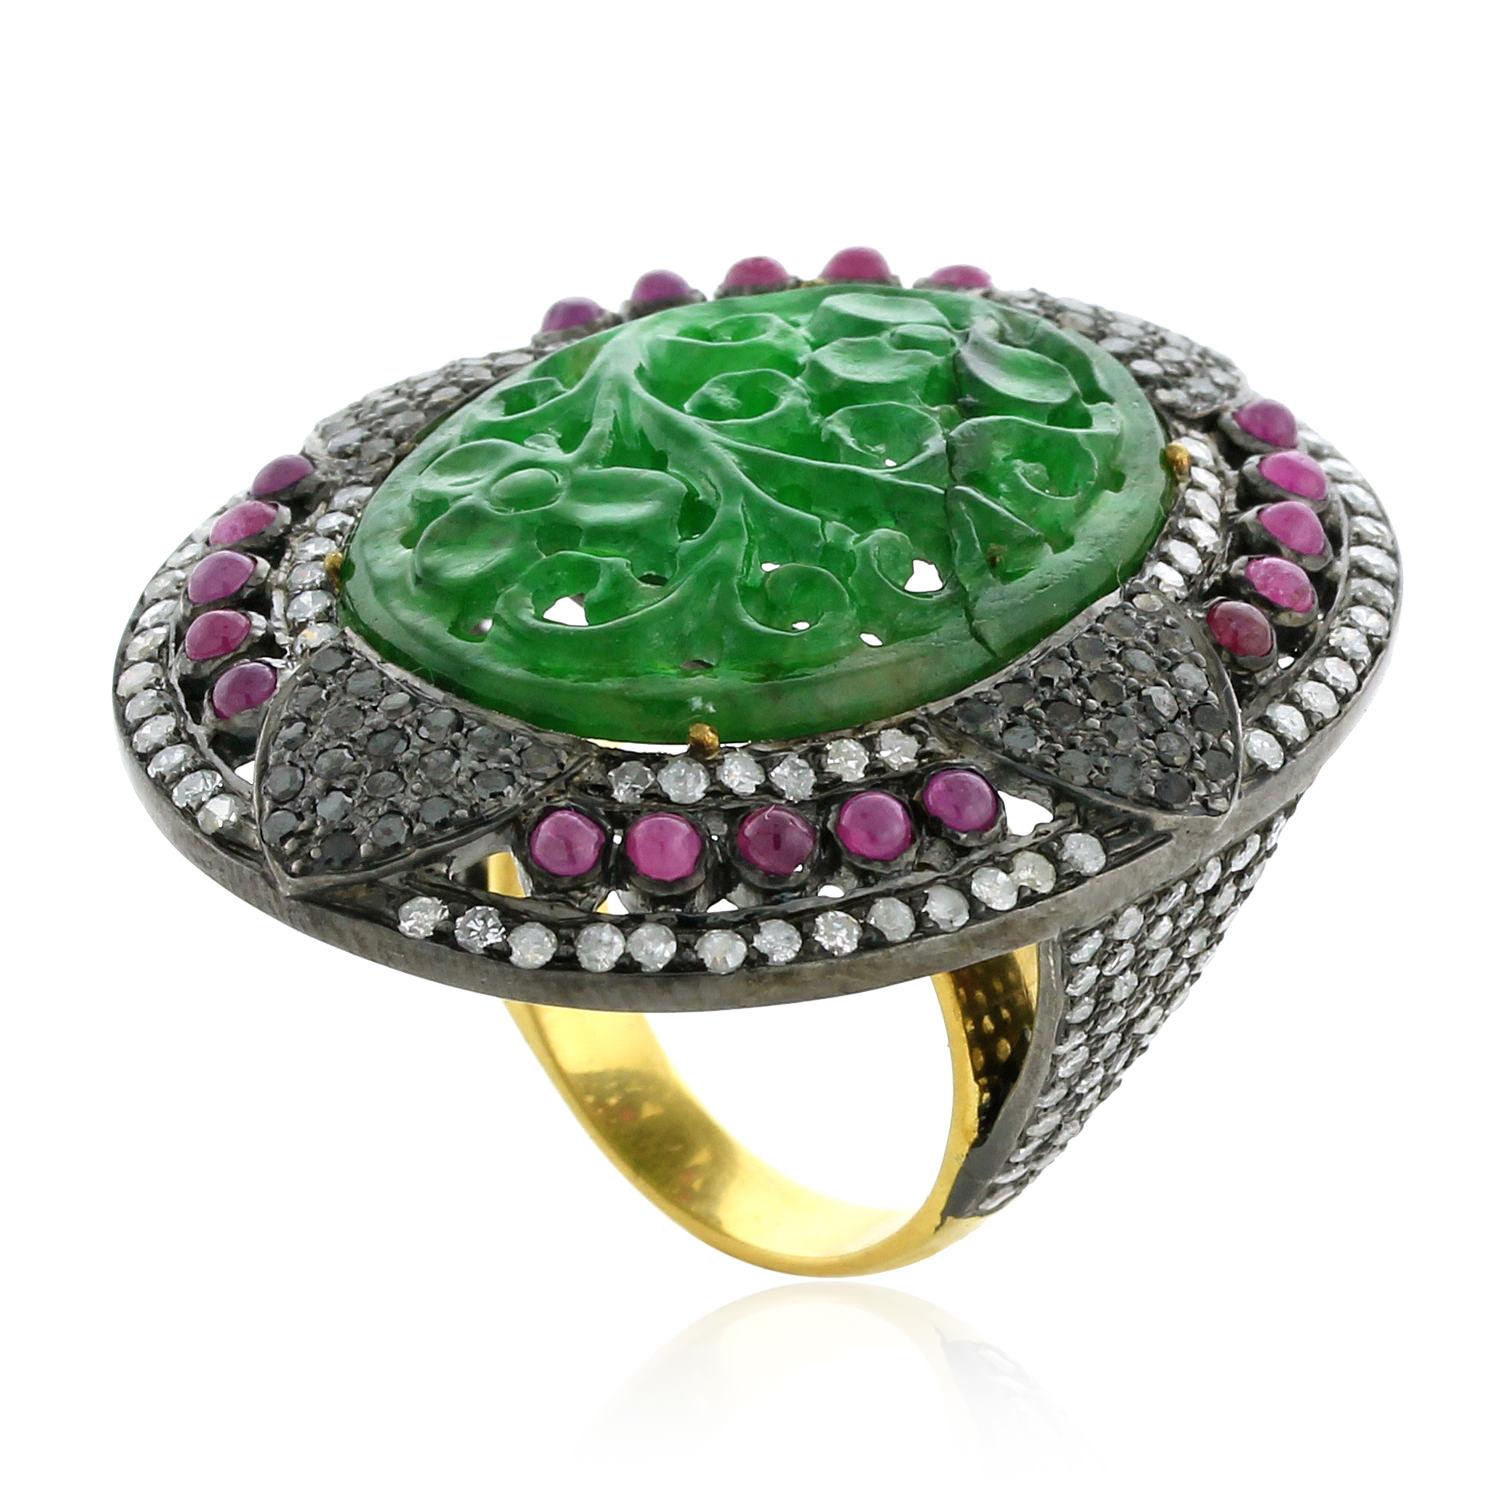 Pretty in green this Hand Craved Jade Ring with Diamond & Rubies in silver and gold can be worn well with any color dress from a casual to a formal evening.

Ring Size: 7  ( Can be sized )

18k: 4.6gms
Diamond: 2.88cts
Slv: